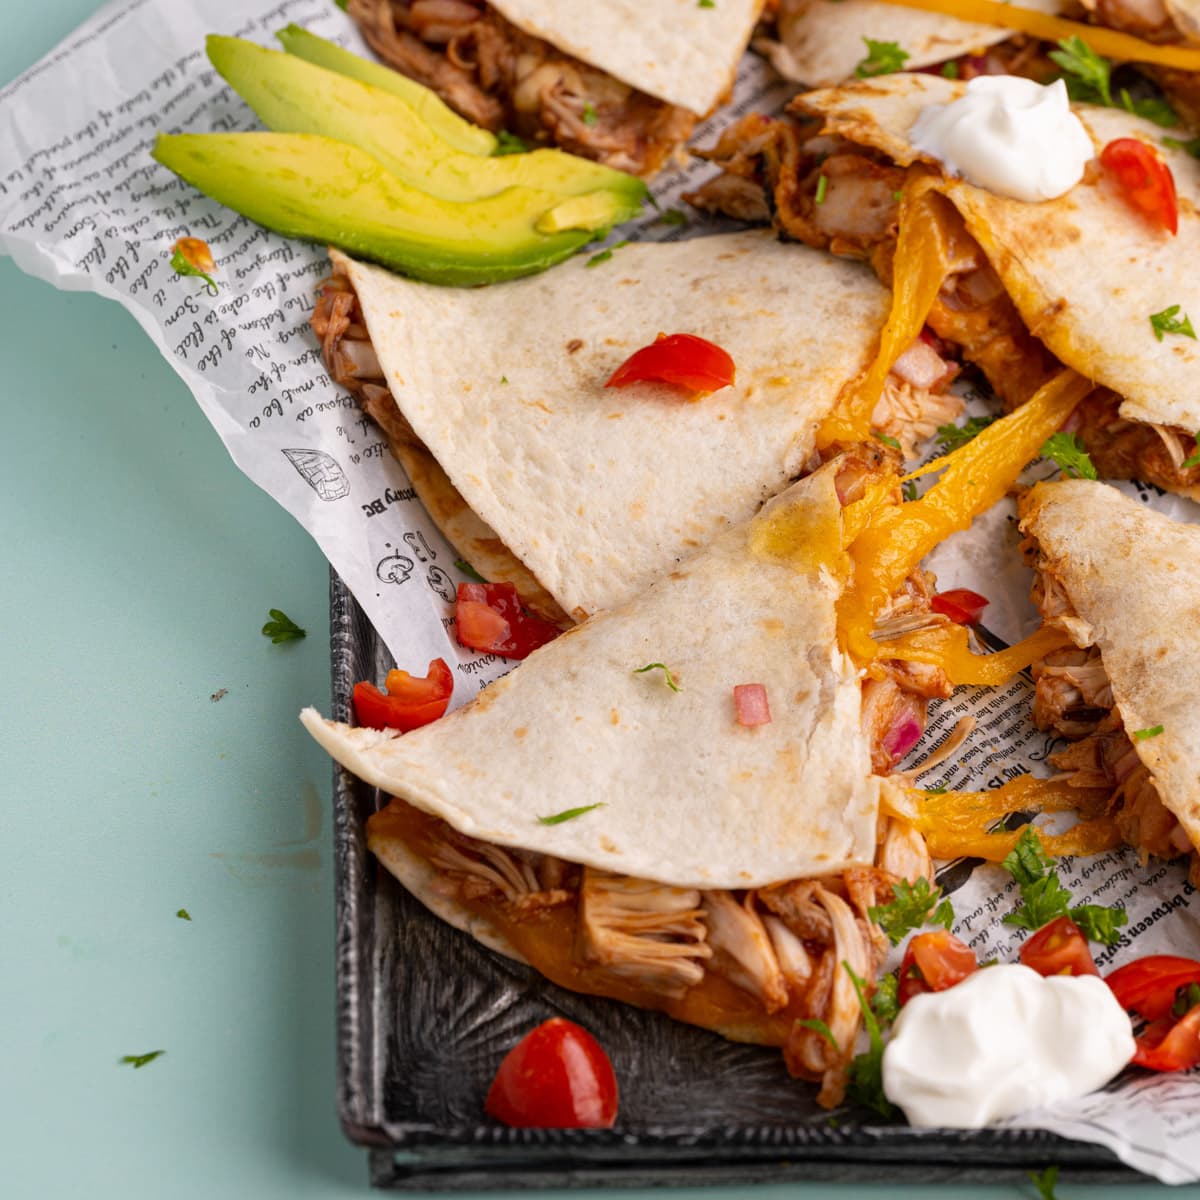 BBQ jackfruit quesadilla to represent list of 5-ingredient or less dinners.